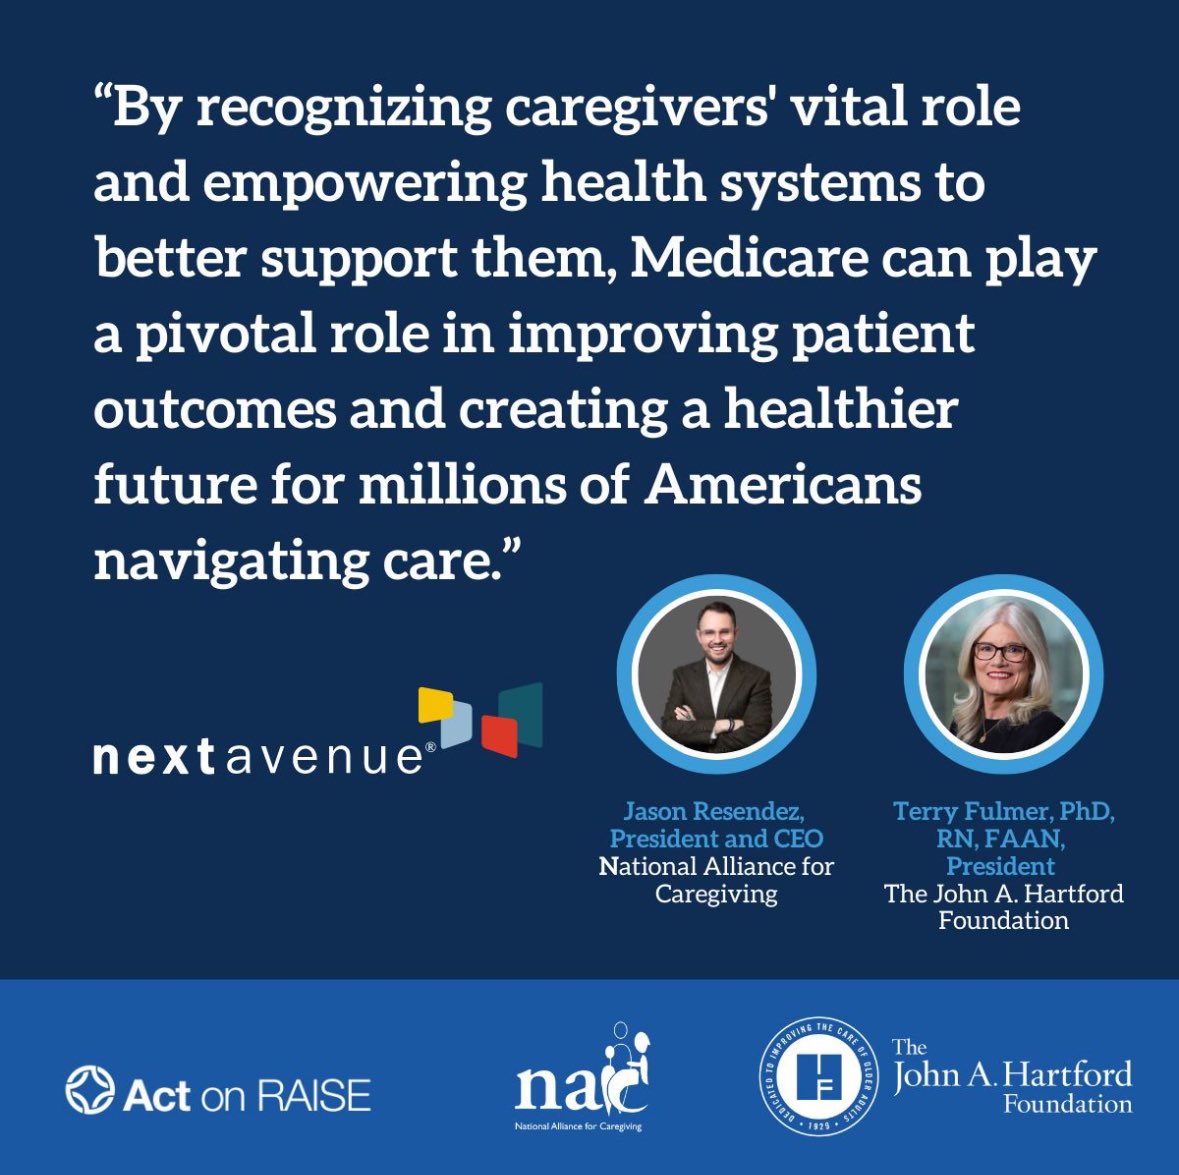 I teamed up w/ Terry Fulmer, President of @johnahartford, to reflect on @POTUS’s Executive Order on Supporting Caregivers. We call for continued action to strengthen #Medicare’s support of family caregivers. nextavenue.org/recognizing-am… #ActOnRAISE #CaregiverNation